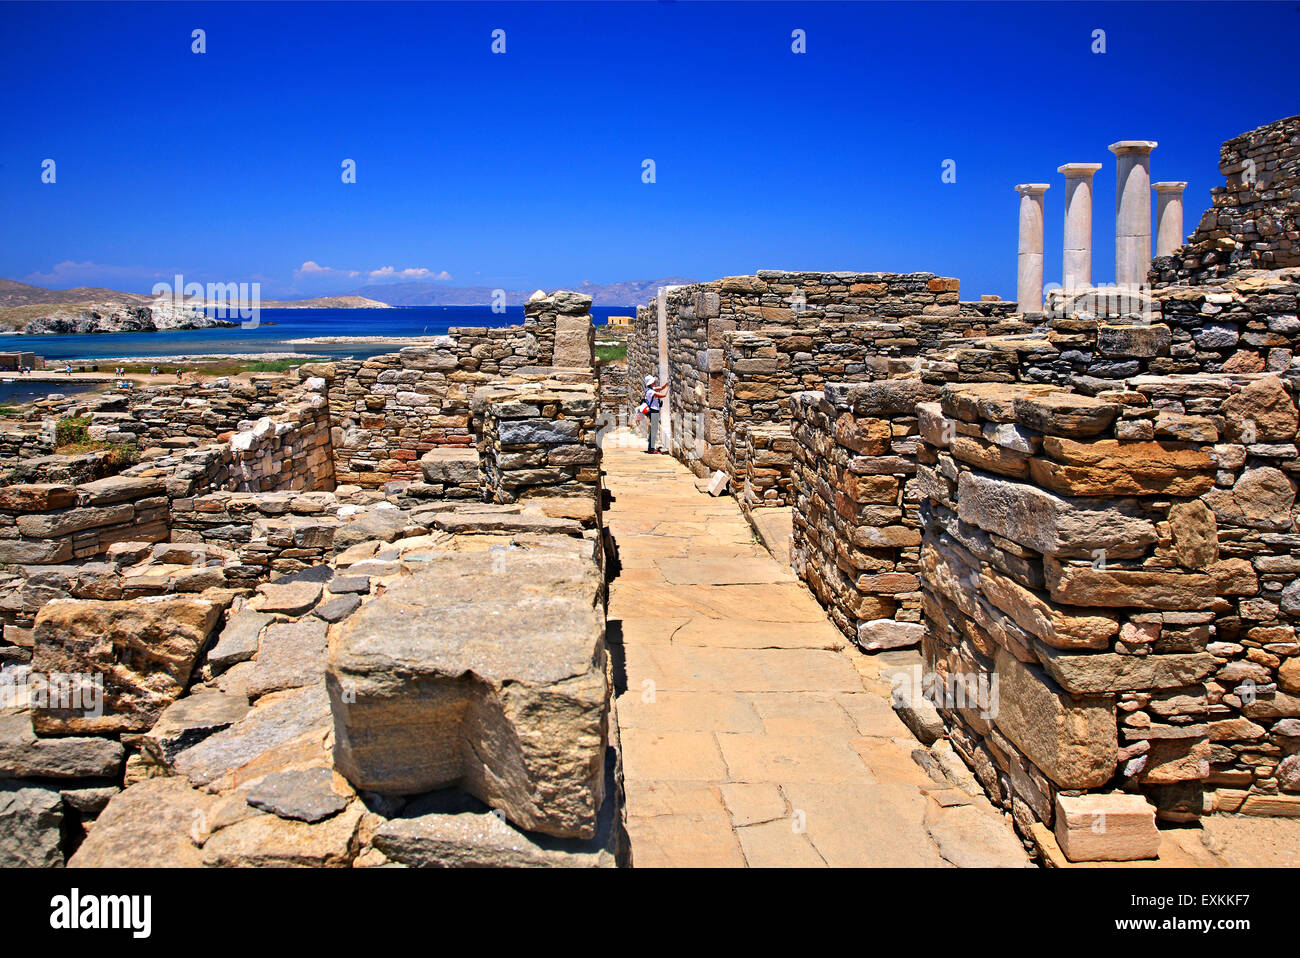 Walking around the ancient town in the archaeological site of the 'sacred' island of Delos. Cyclades, Greece. Stock Photo